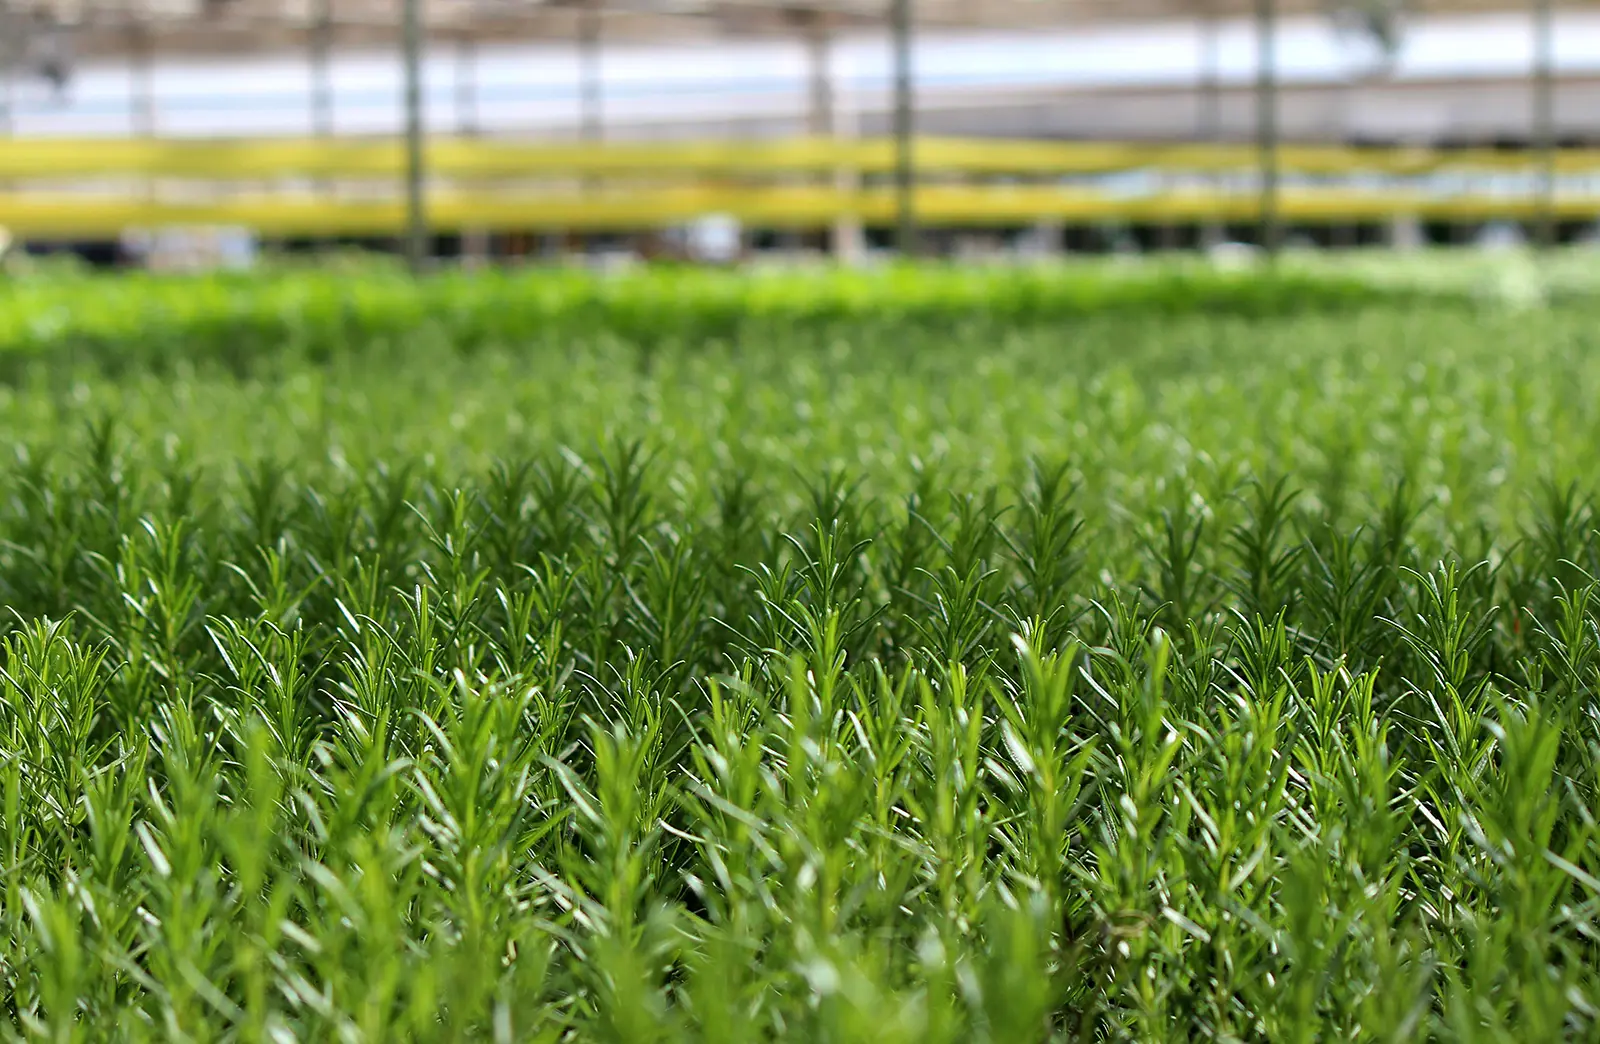 Rosemary plants growing in a greenhouse.